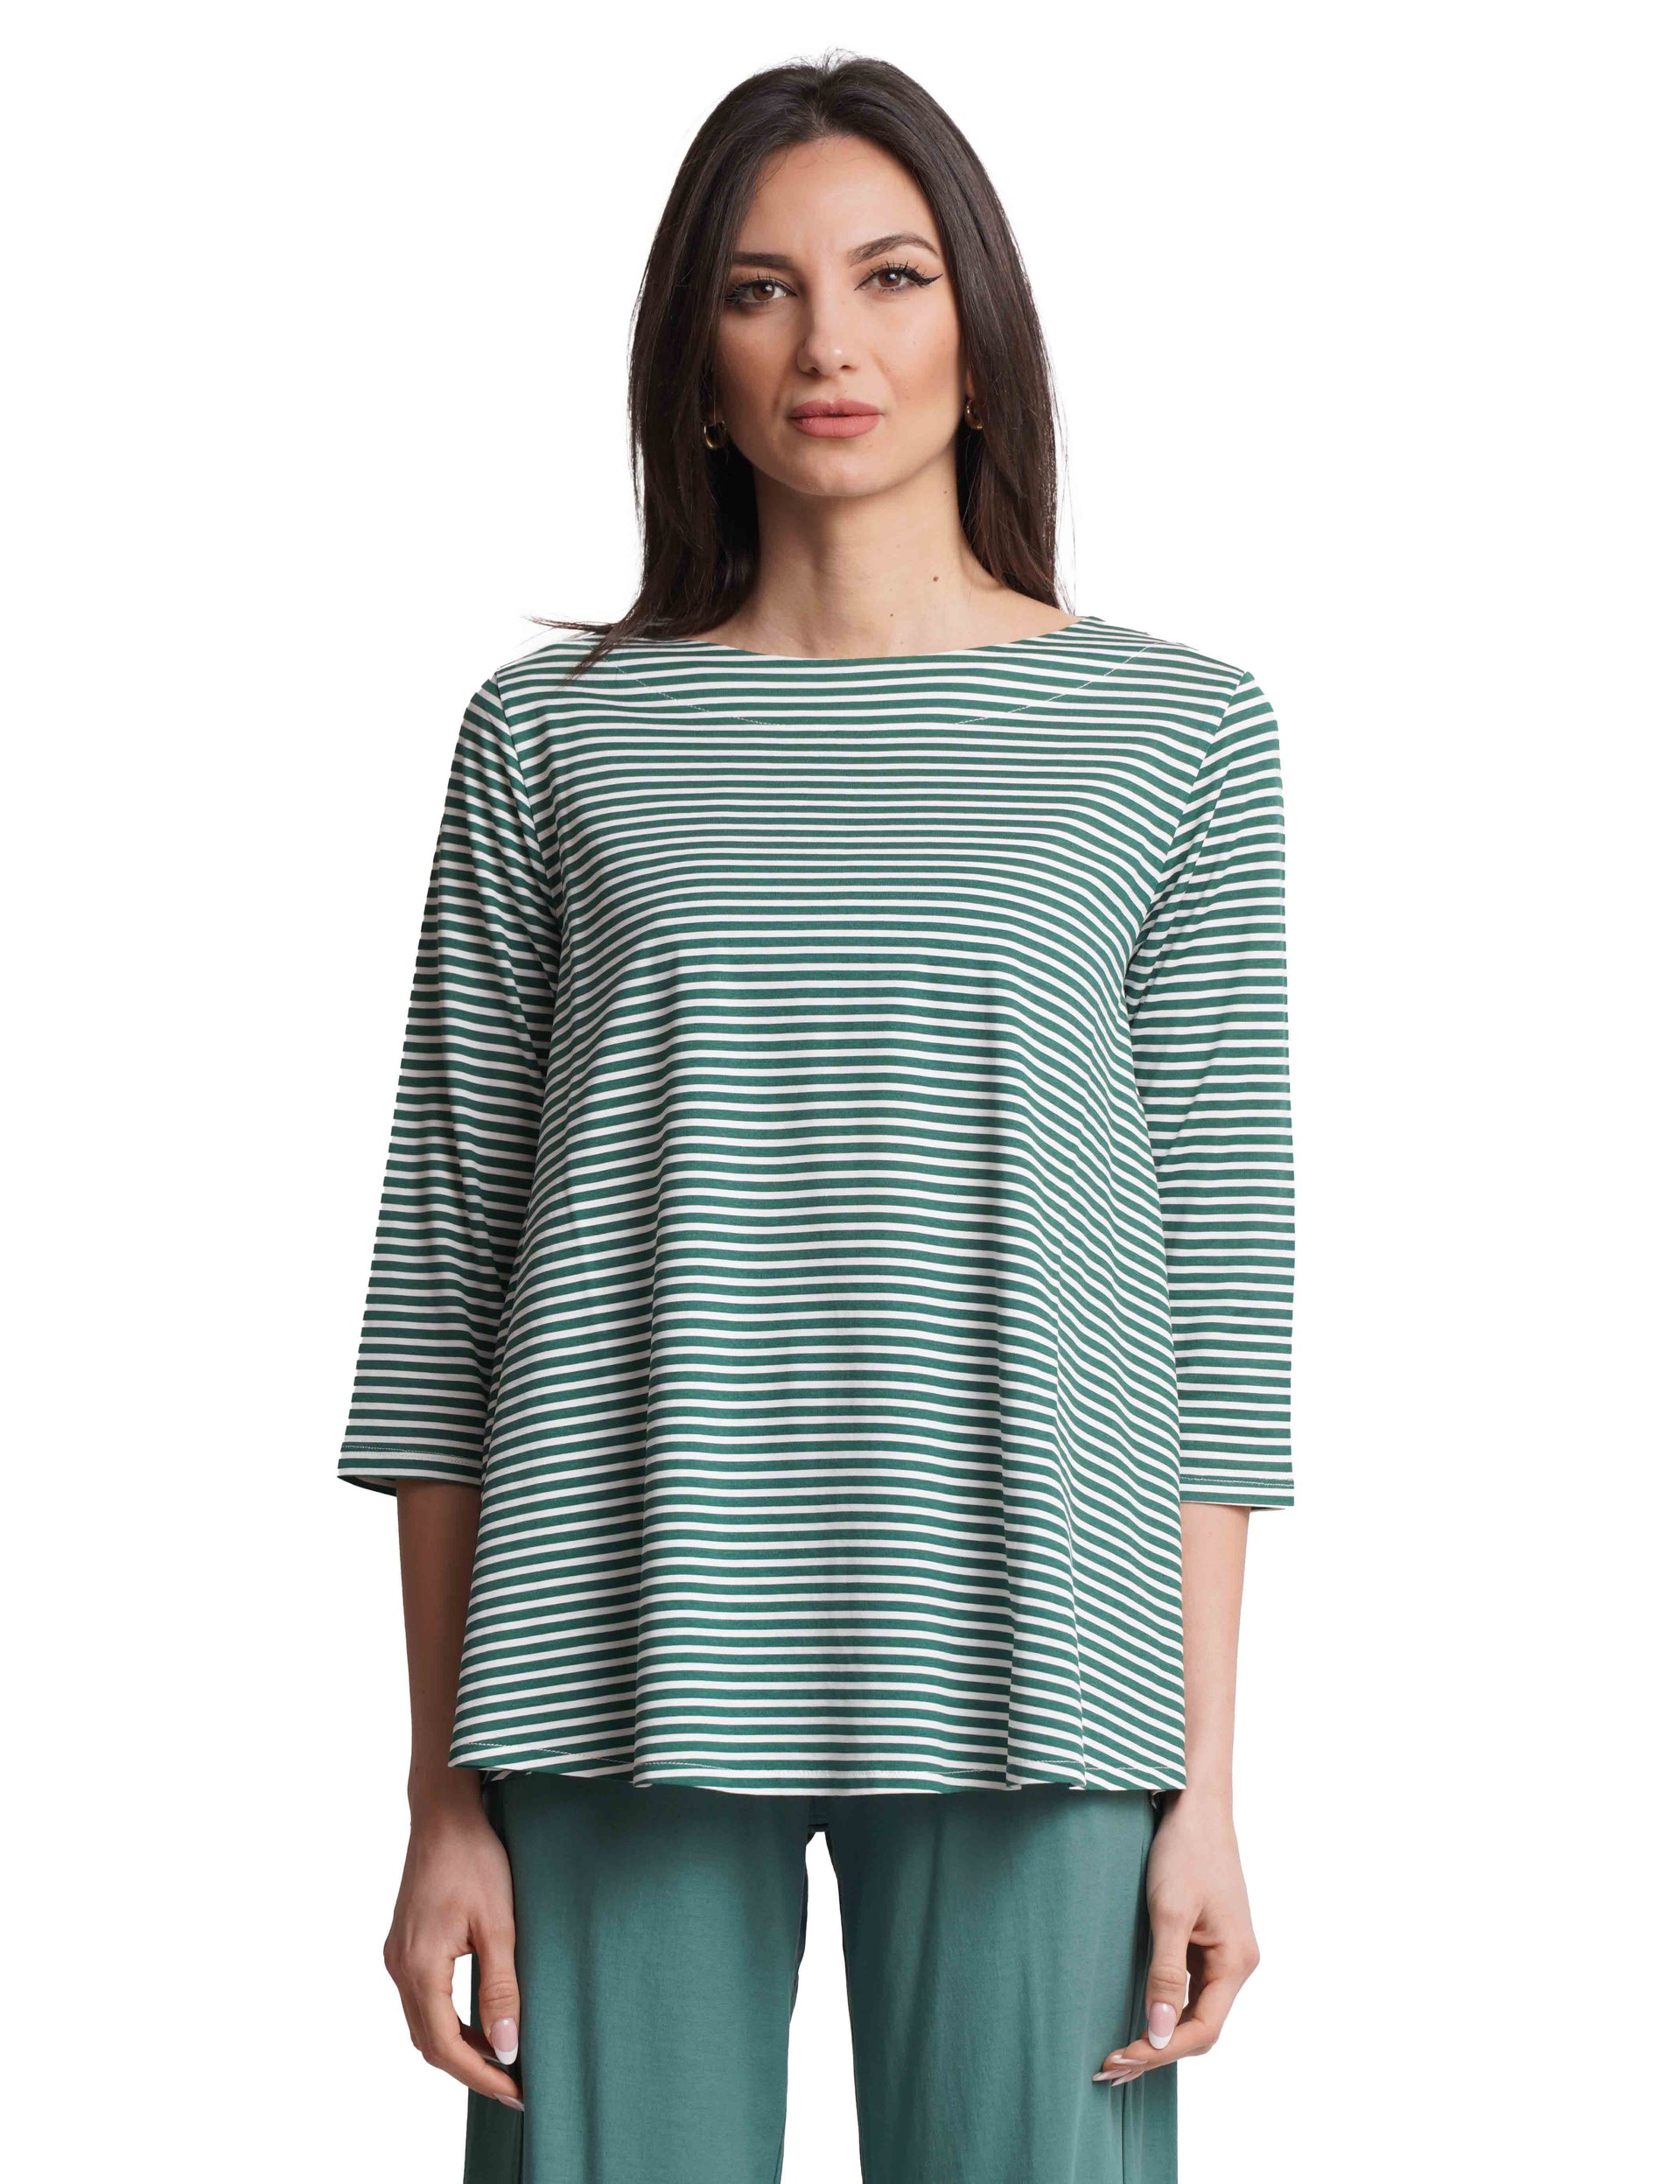 Women's green and white cotton t-shirt with 3/4 sleeves